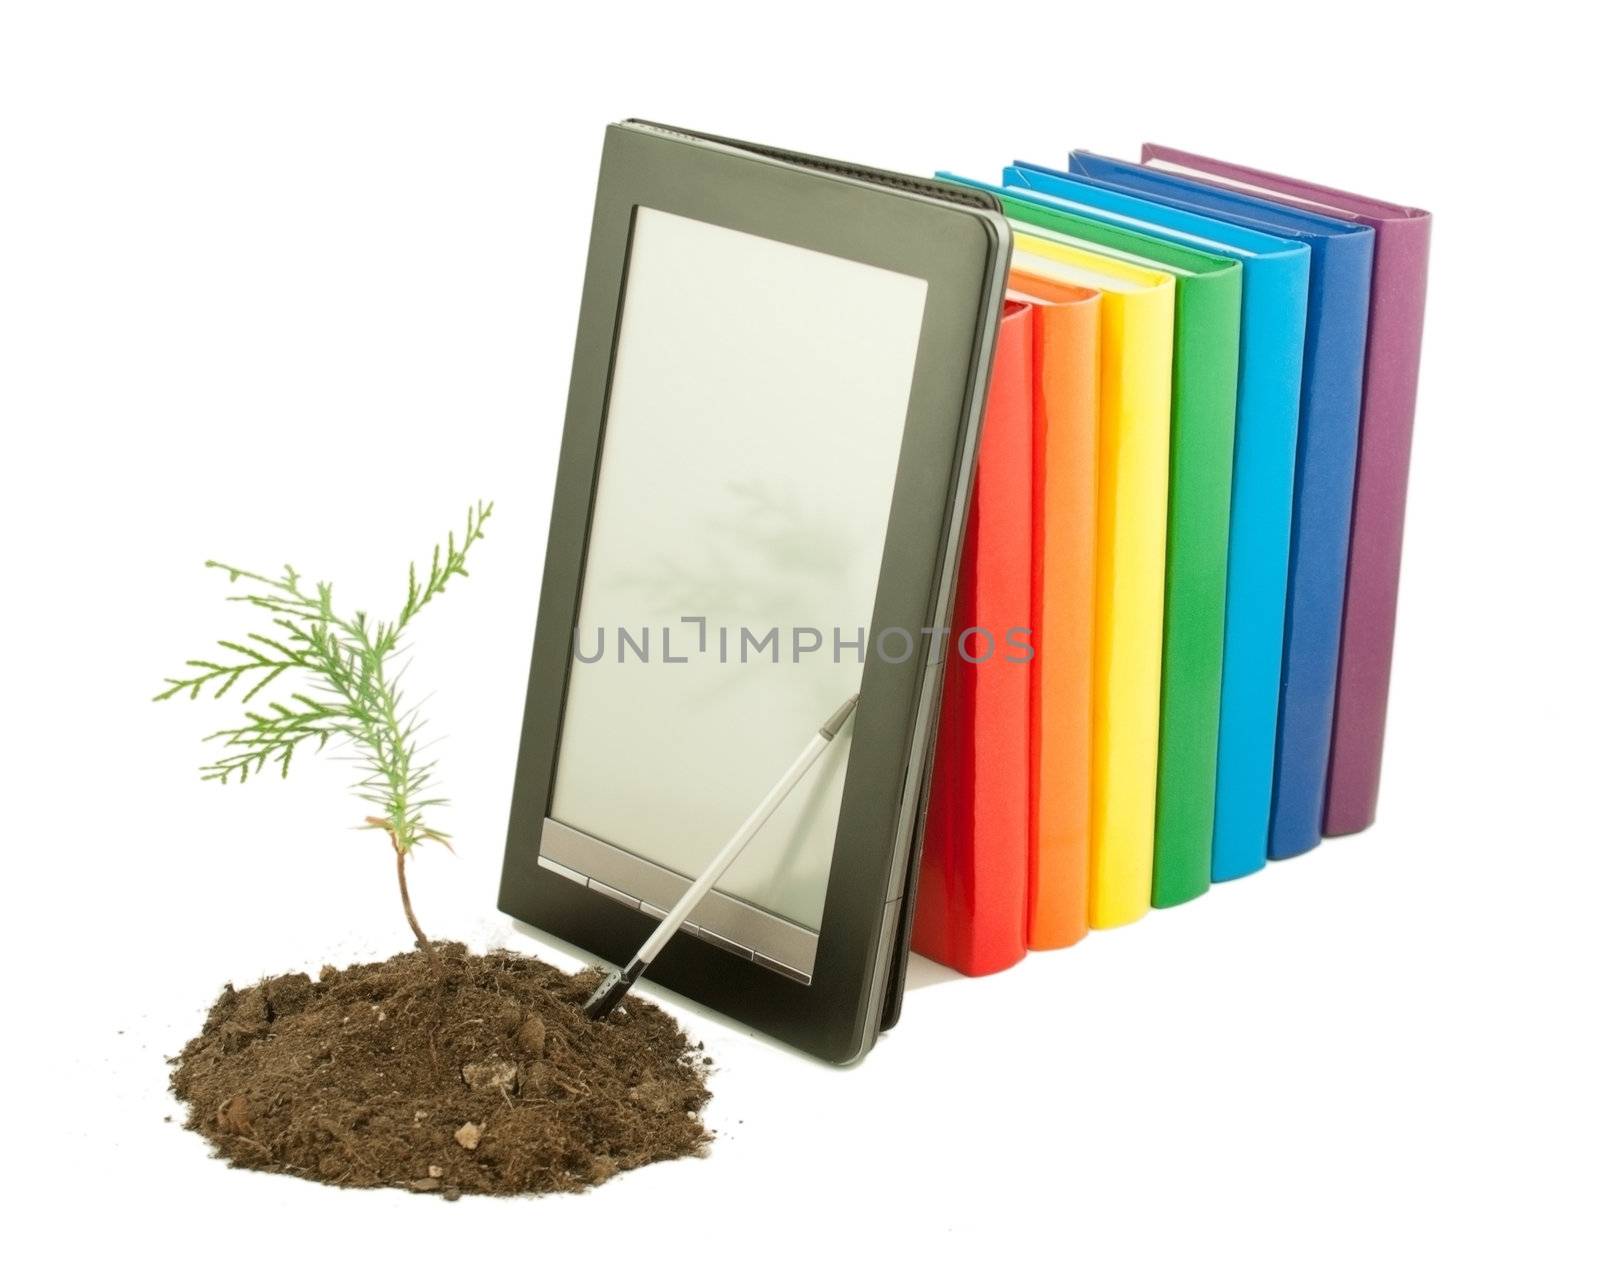 Tree seedling with row of books and electronic book reader behind isolated on white by AndreyKr